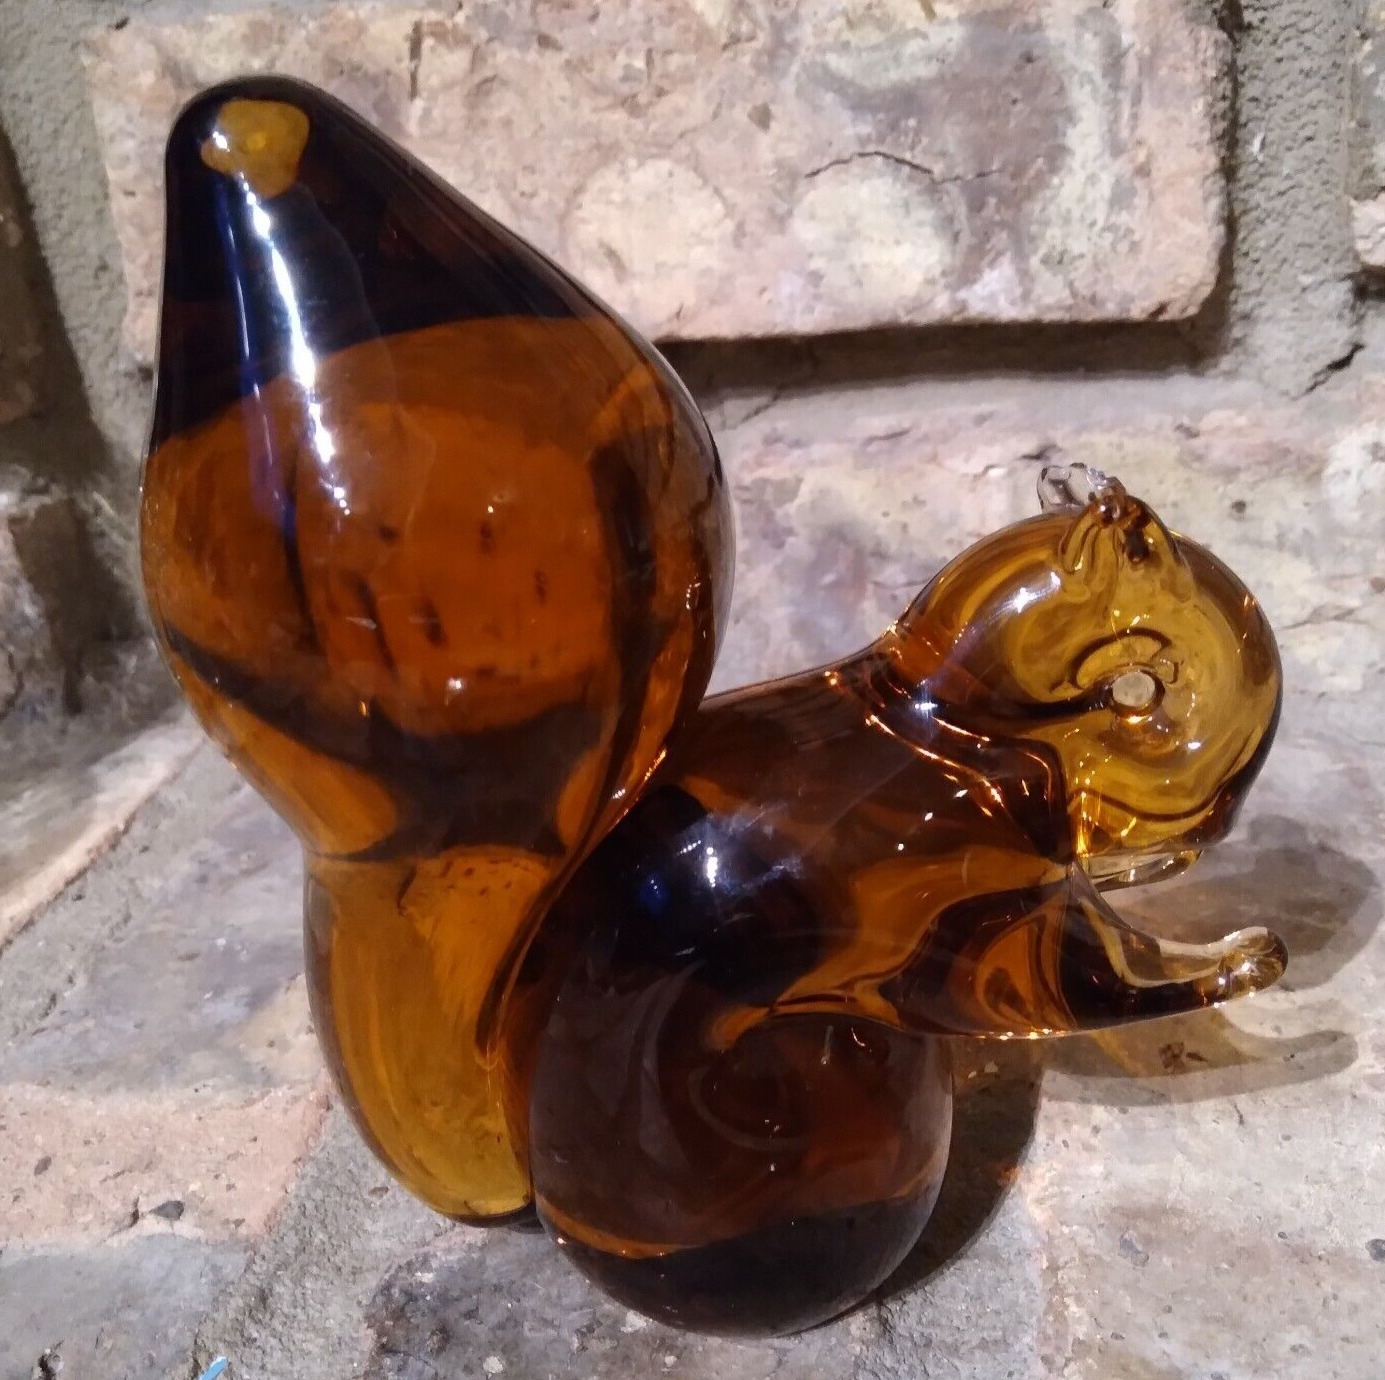 Vintage Brown Glass Squirrel - small chip on ear - Fun for Fall Autumn